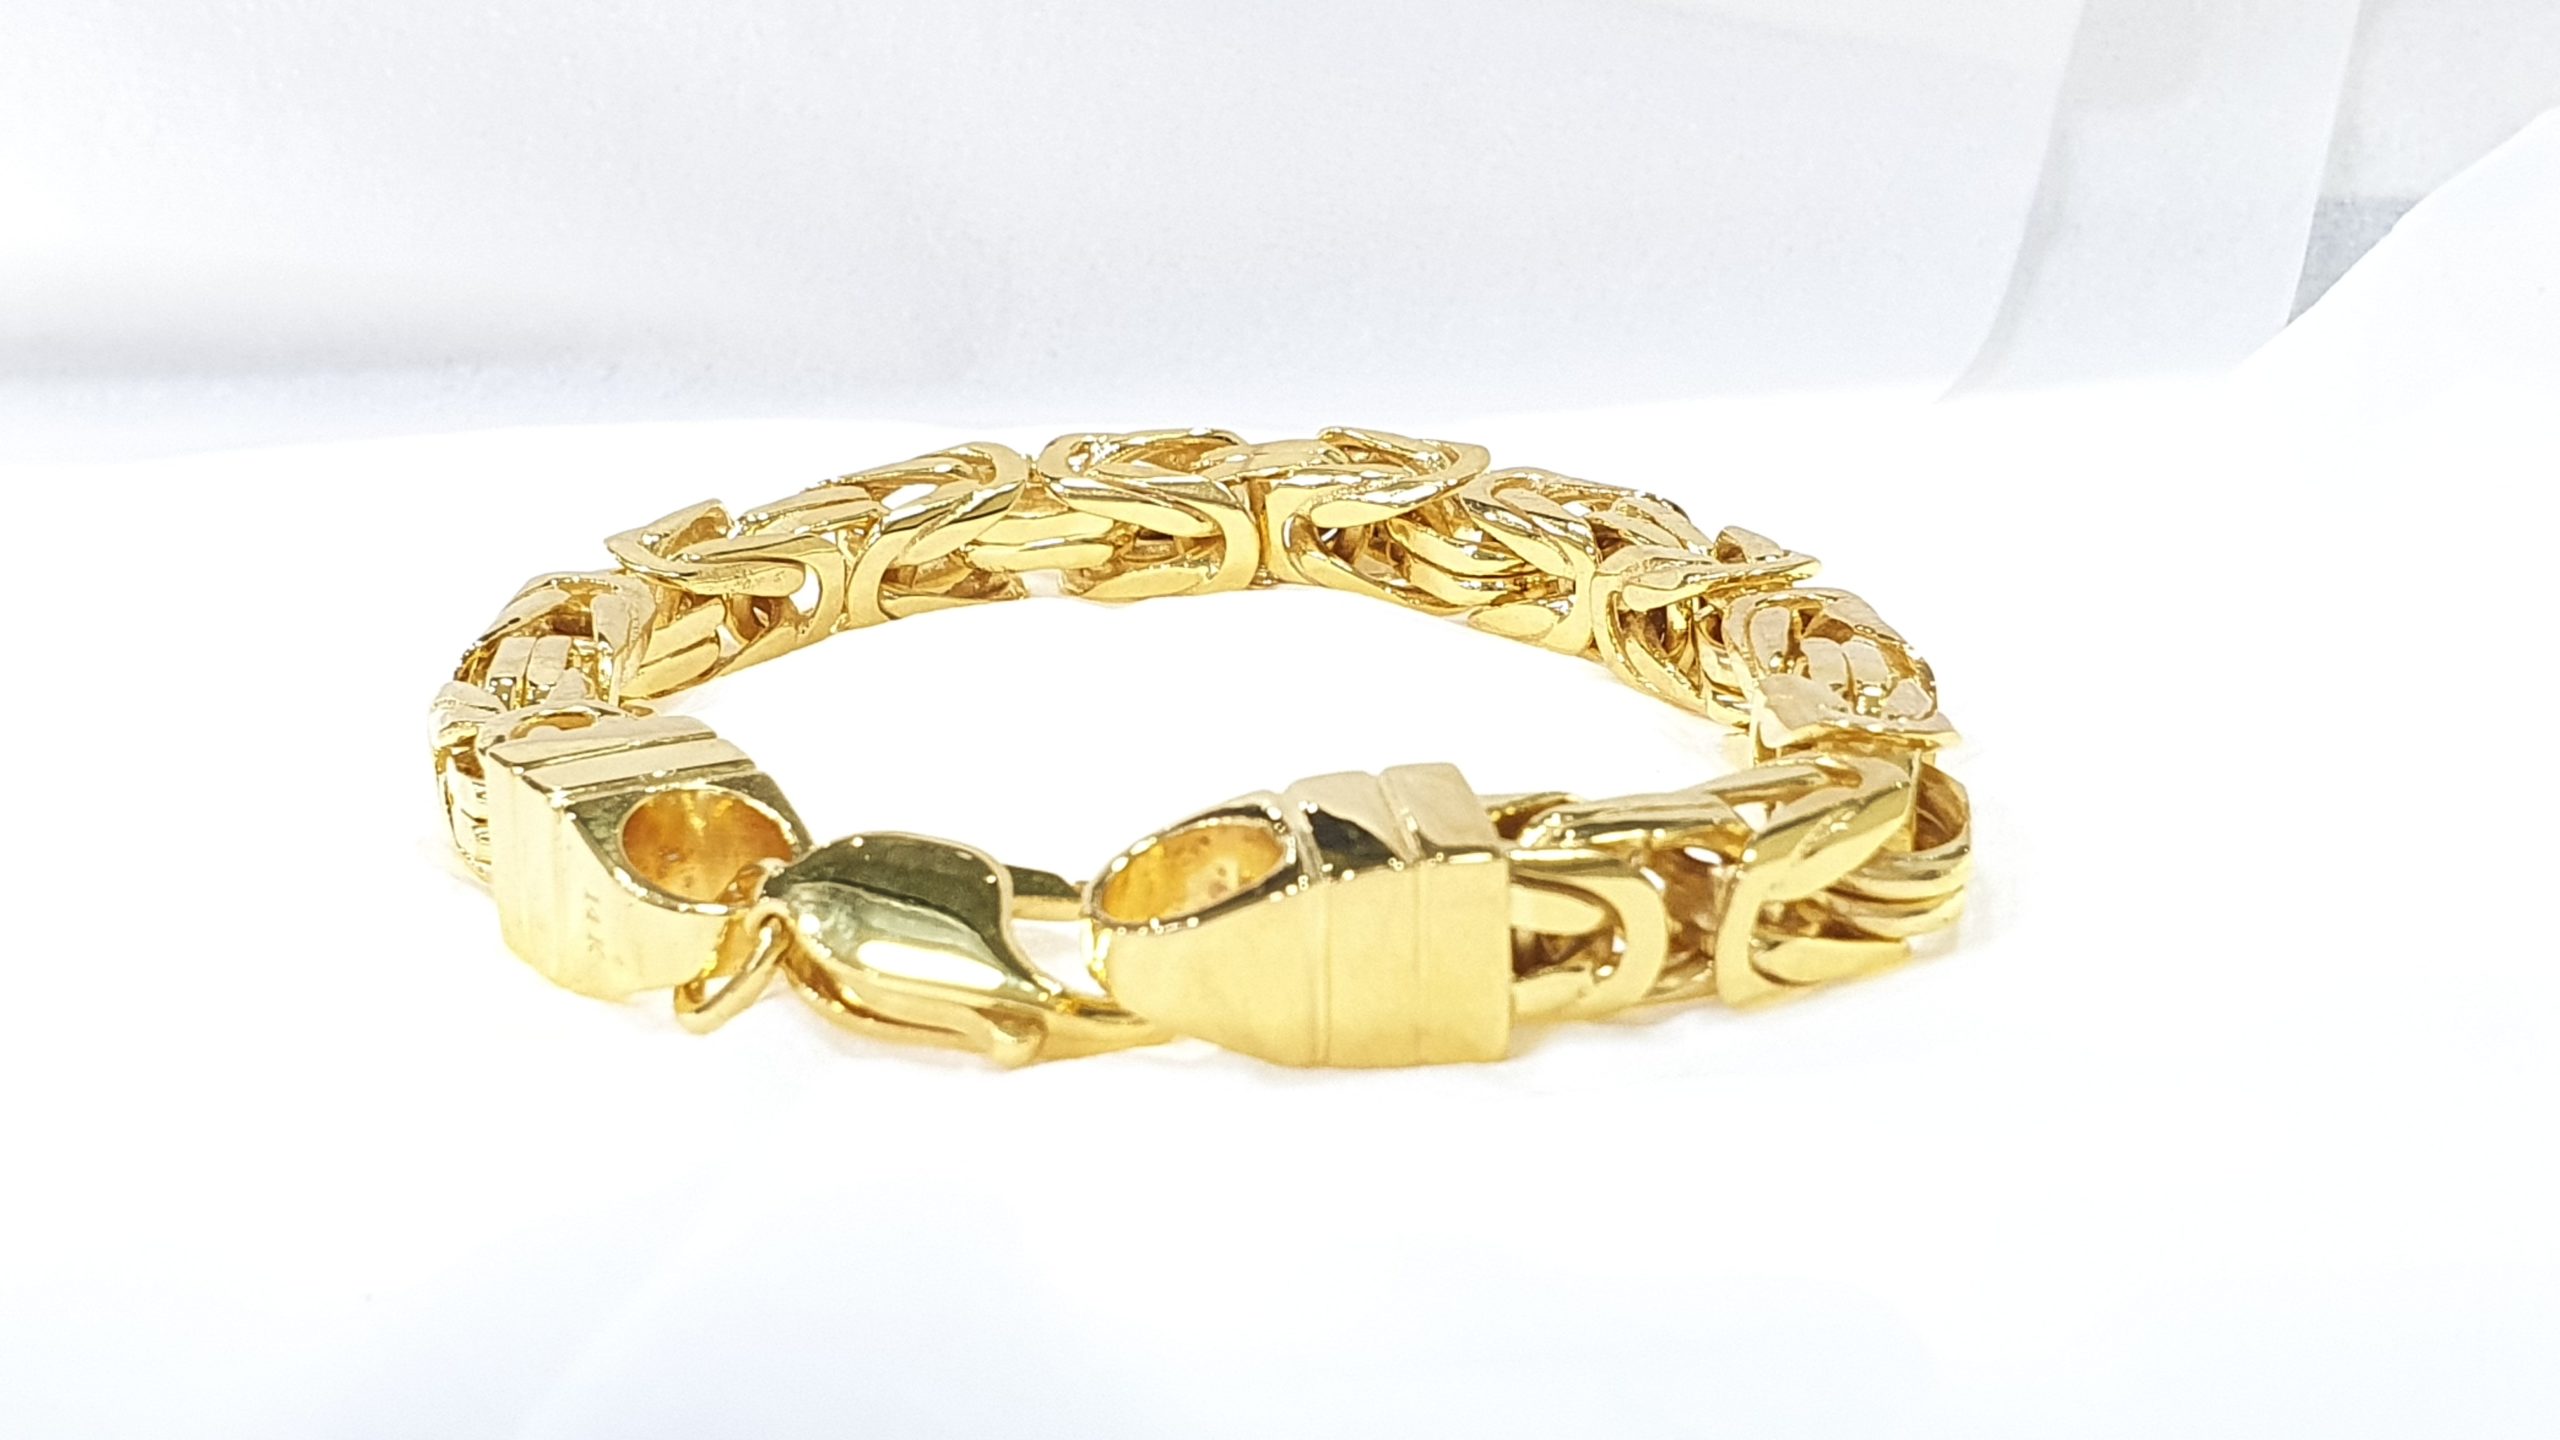 Eternal Classics Wide ID Bracelet 14k Real Solid Yellow Gold Dubai Bangle  Women Mens Trendy Hand Watchband Chain Jewelry From Xinpengbusiness, $6.81  | DHgate.Com